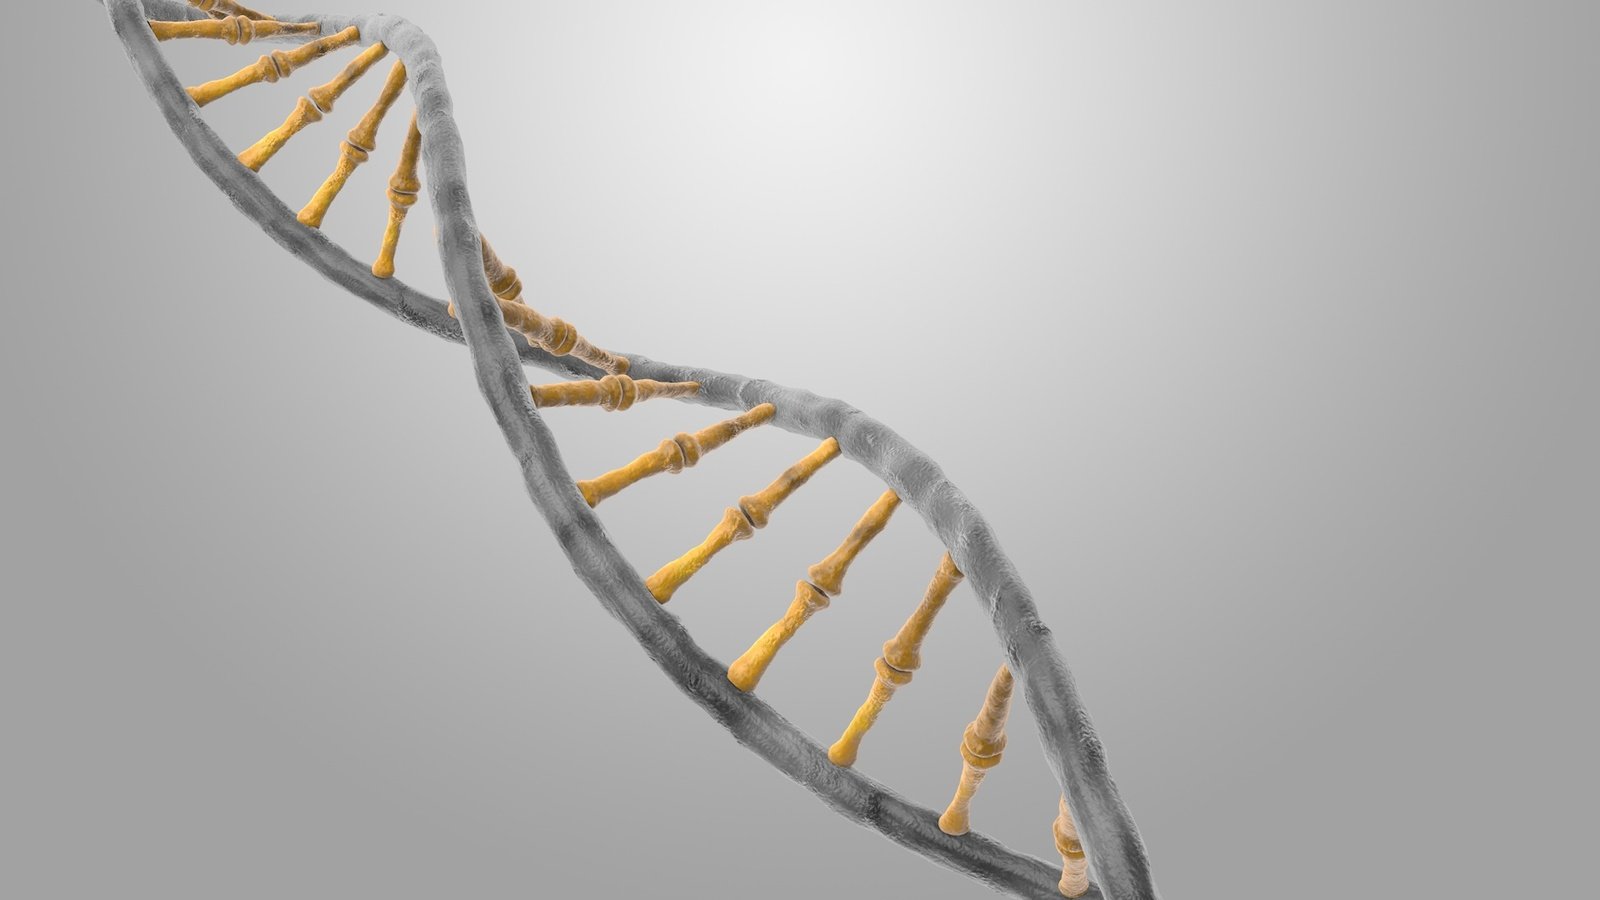 dna-helix-background-image-1-1632628 formateins freeimages